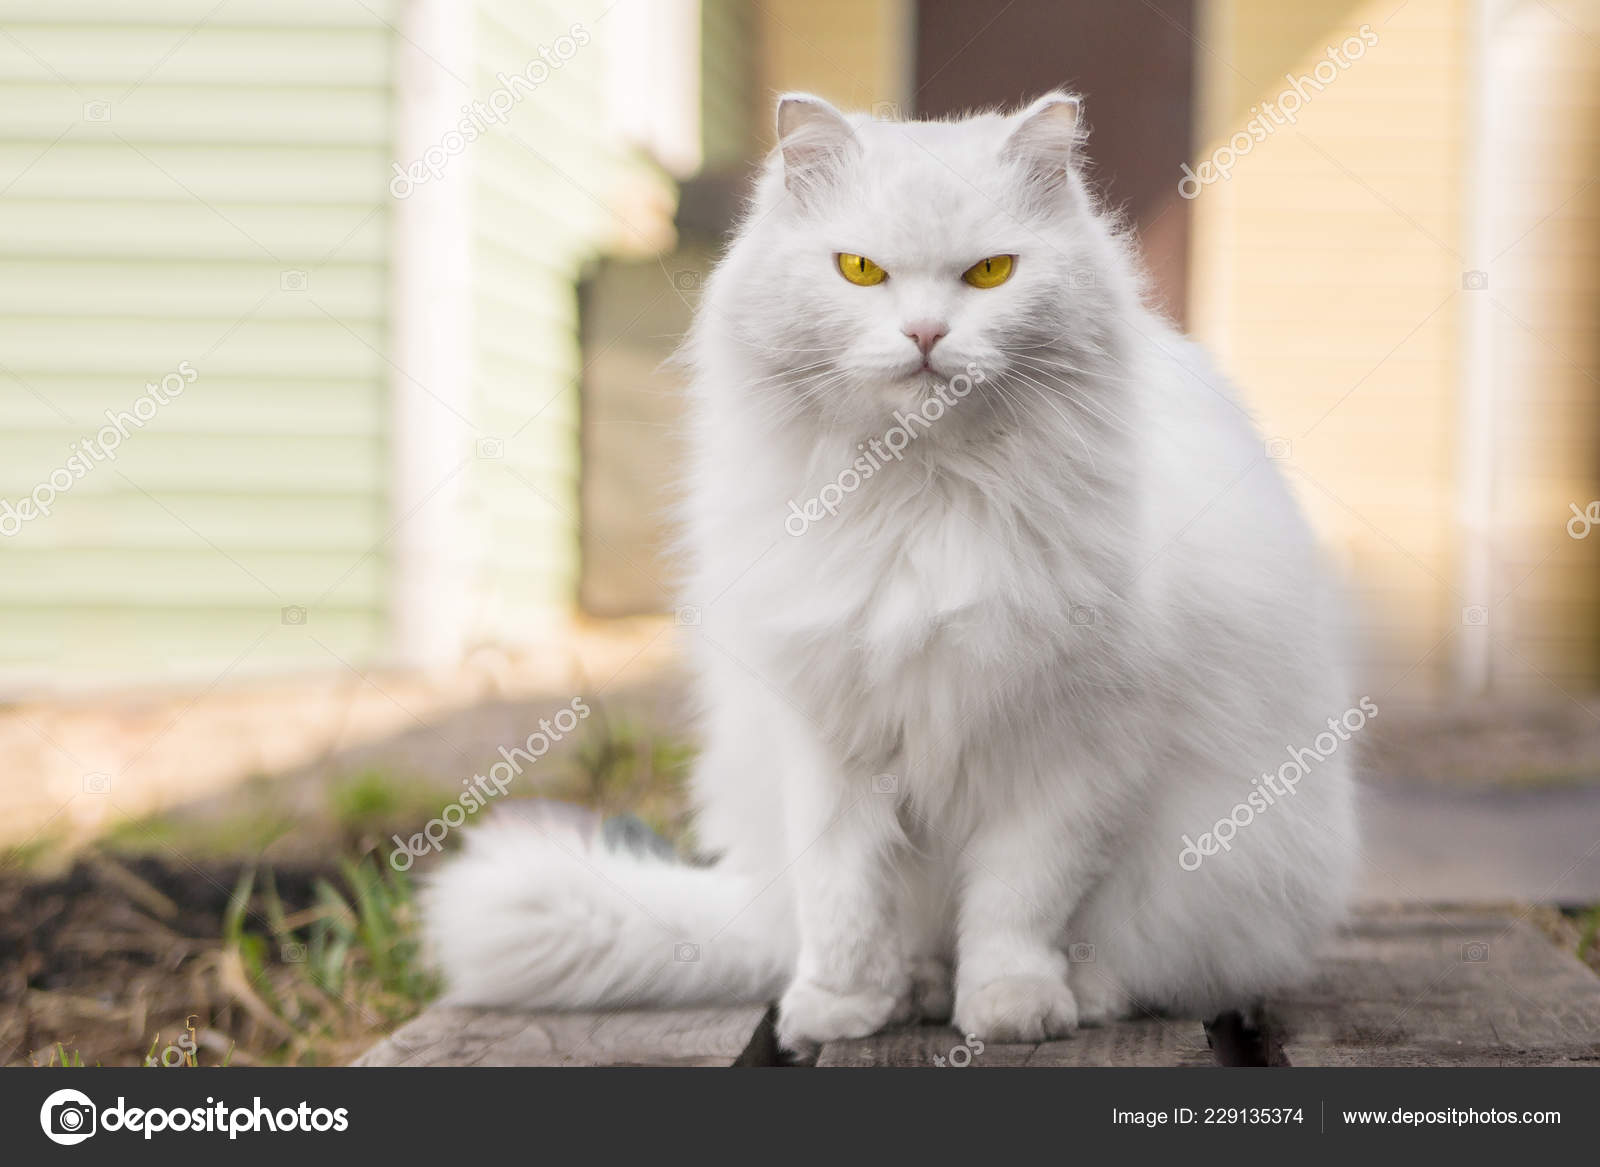 Big white cat on the background of the 